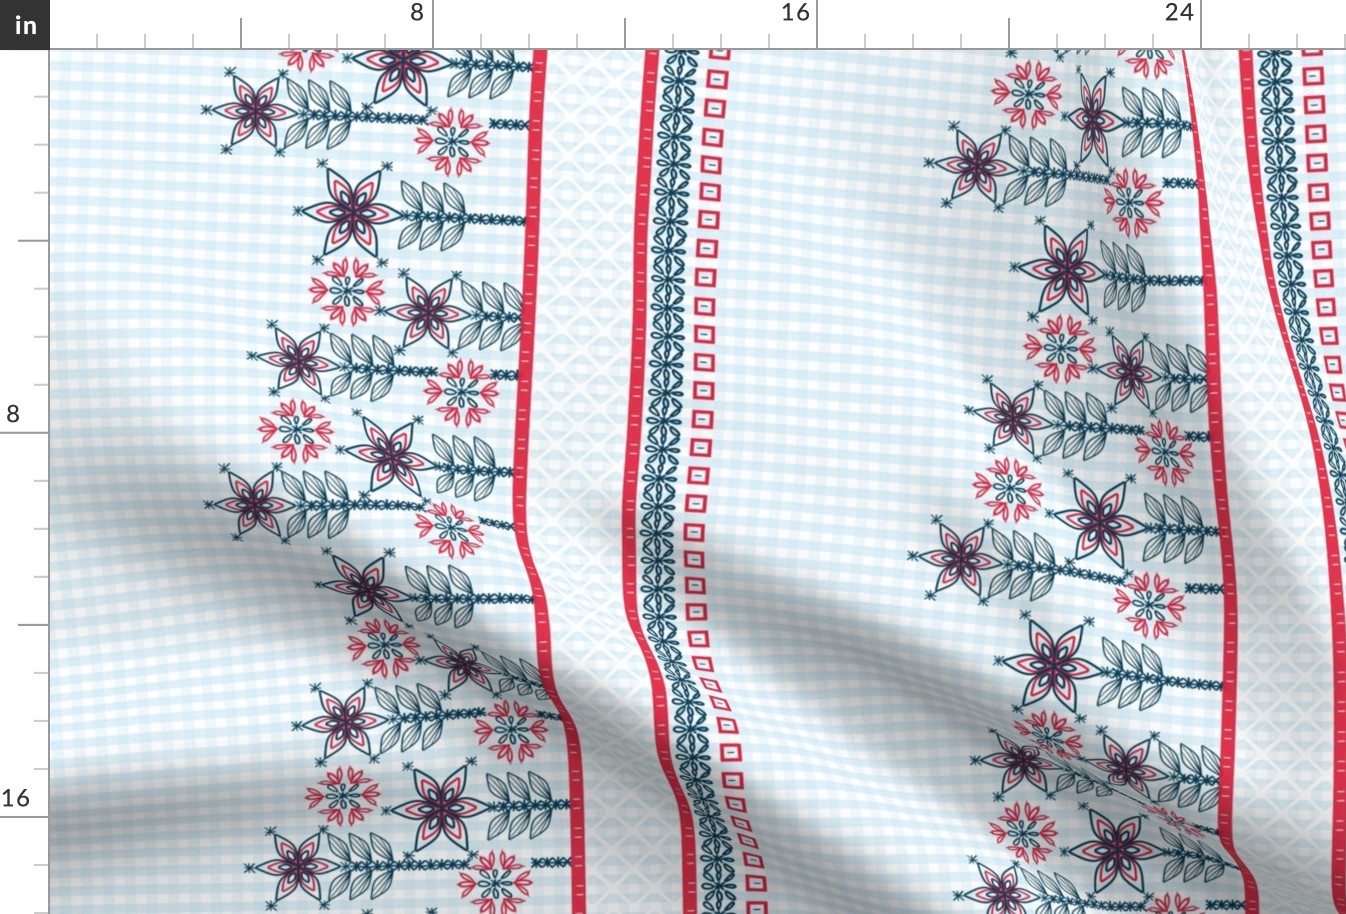 Patriotic Gingham Border of Floral Embroidery